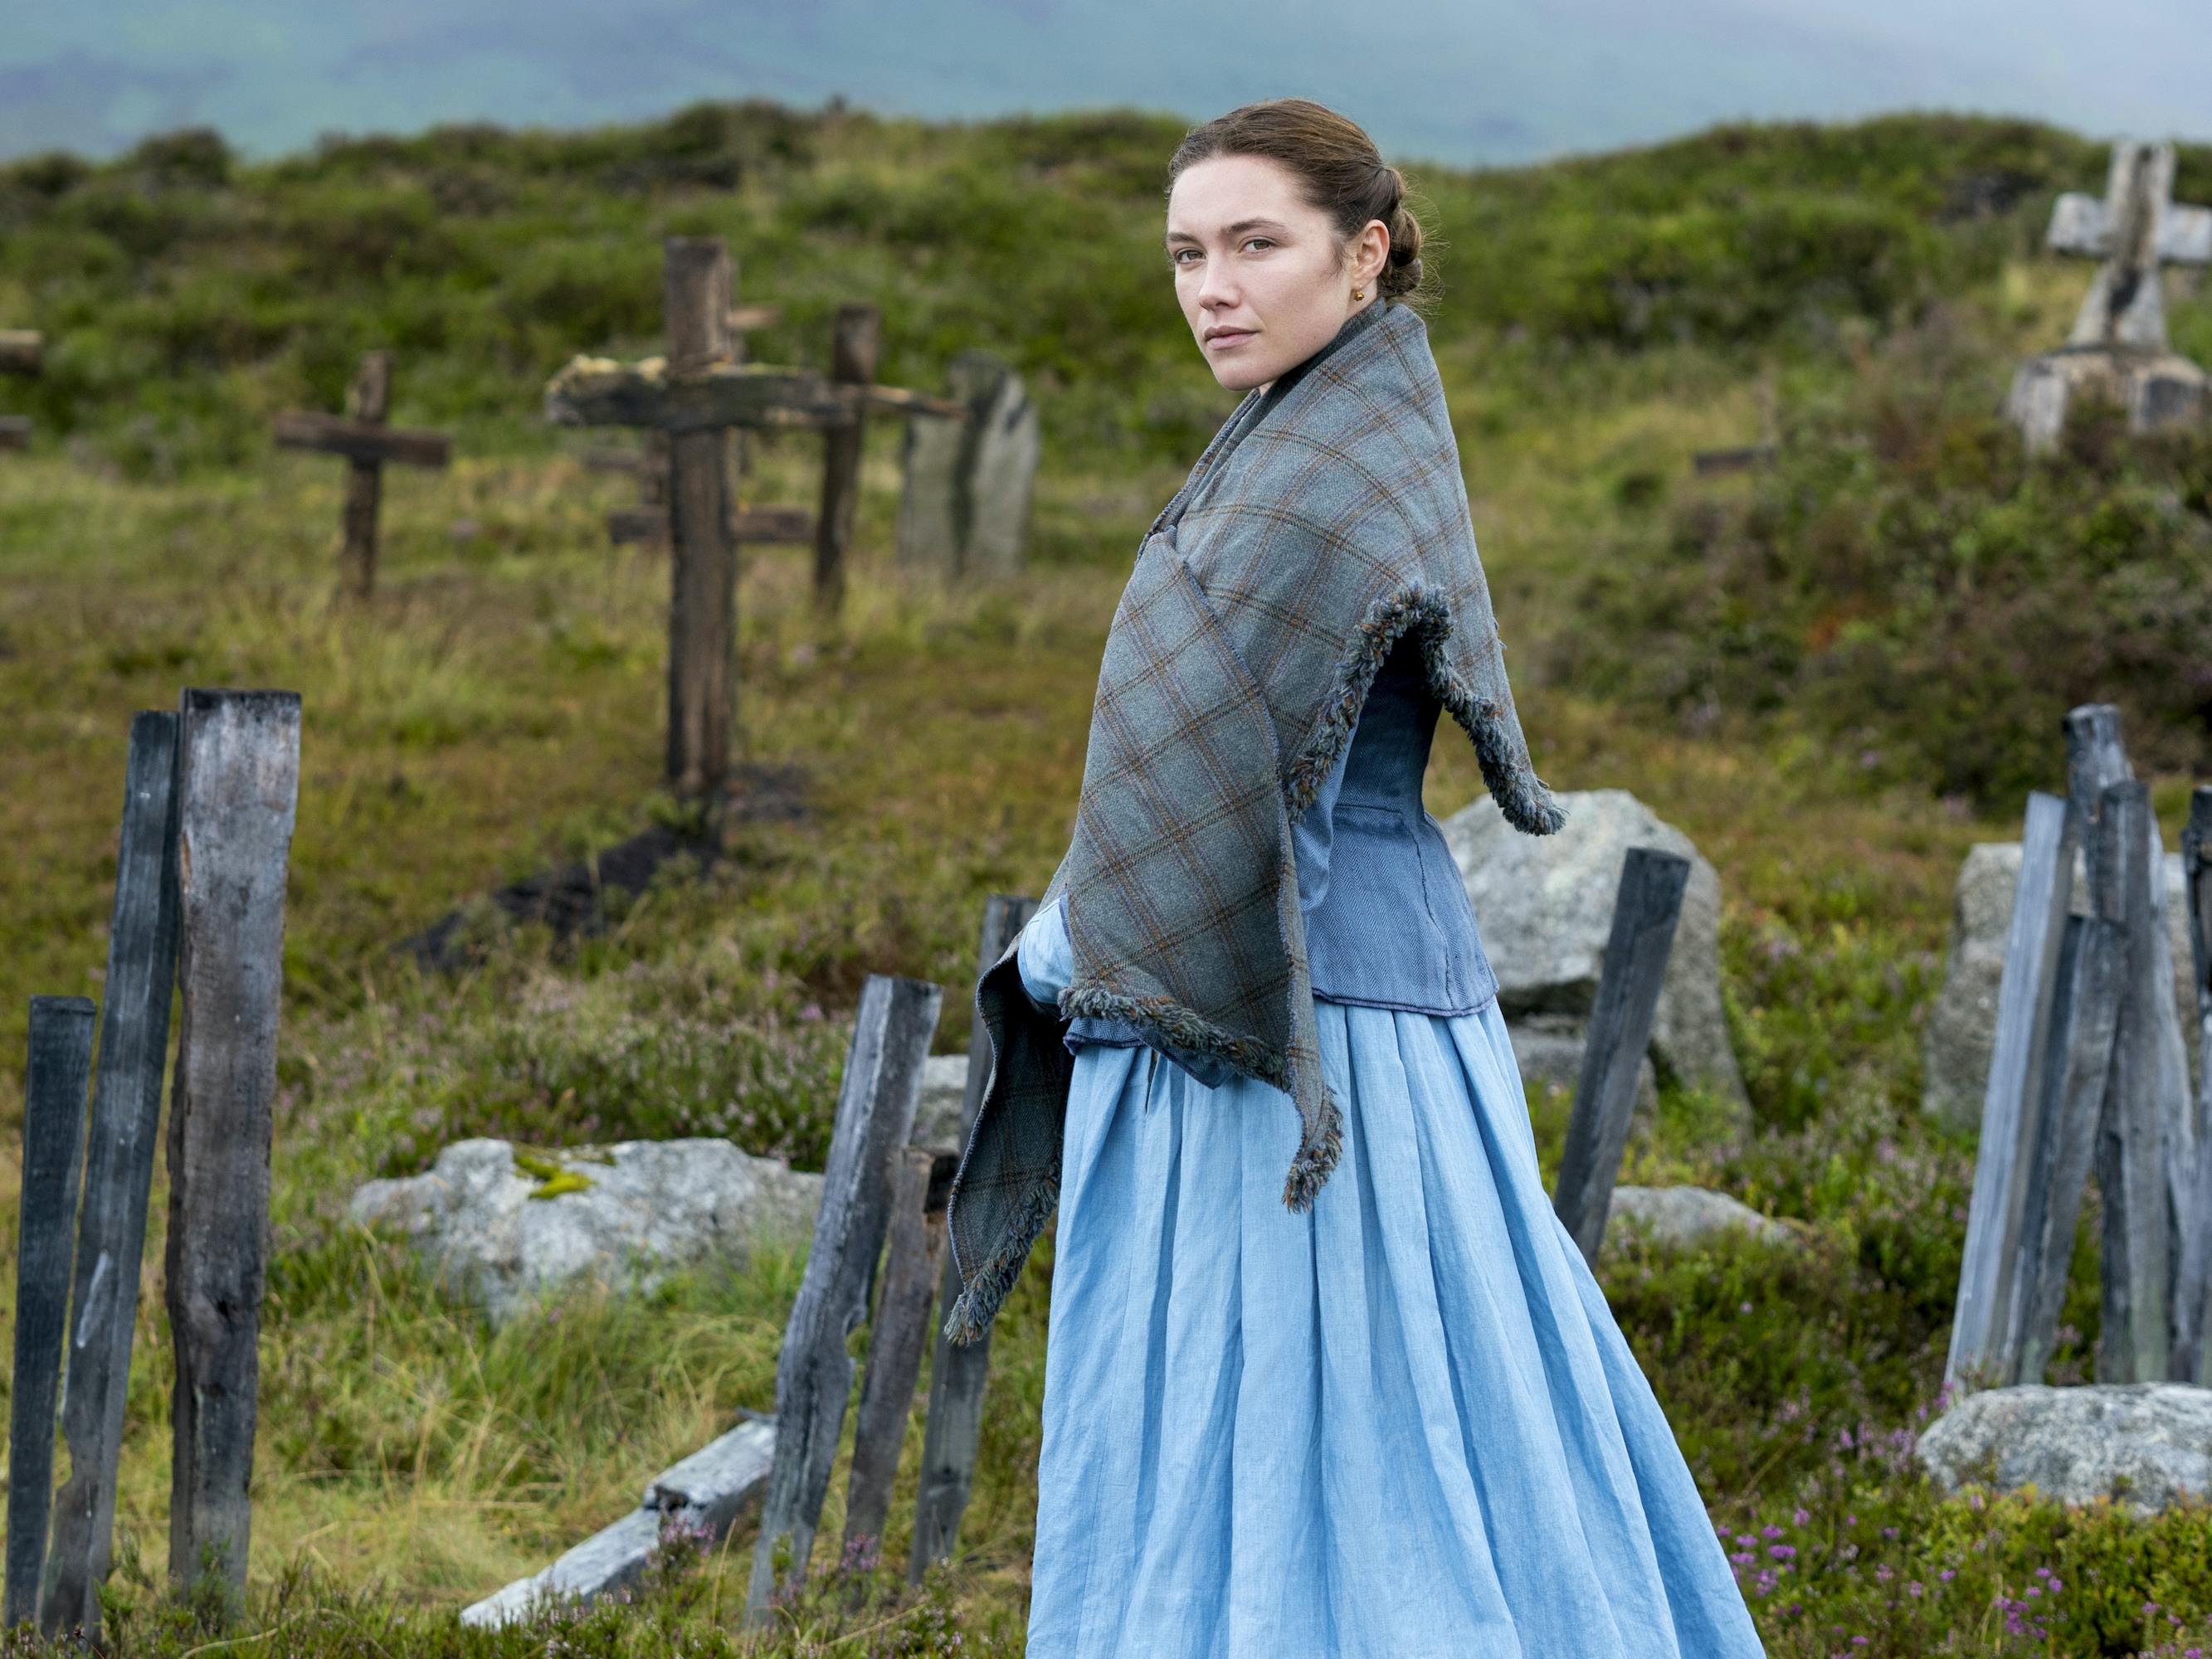 Lib Wright (Florence Pugh) wears a blue dress and stands in a foggy cemetery dotted with crosses.